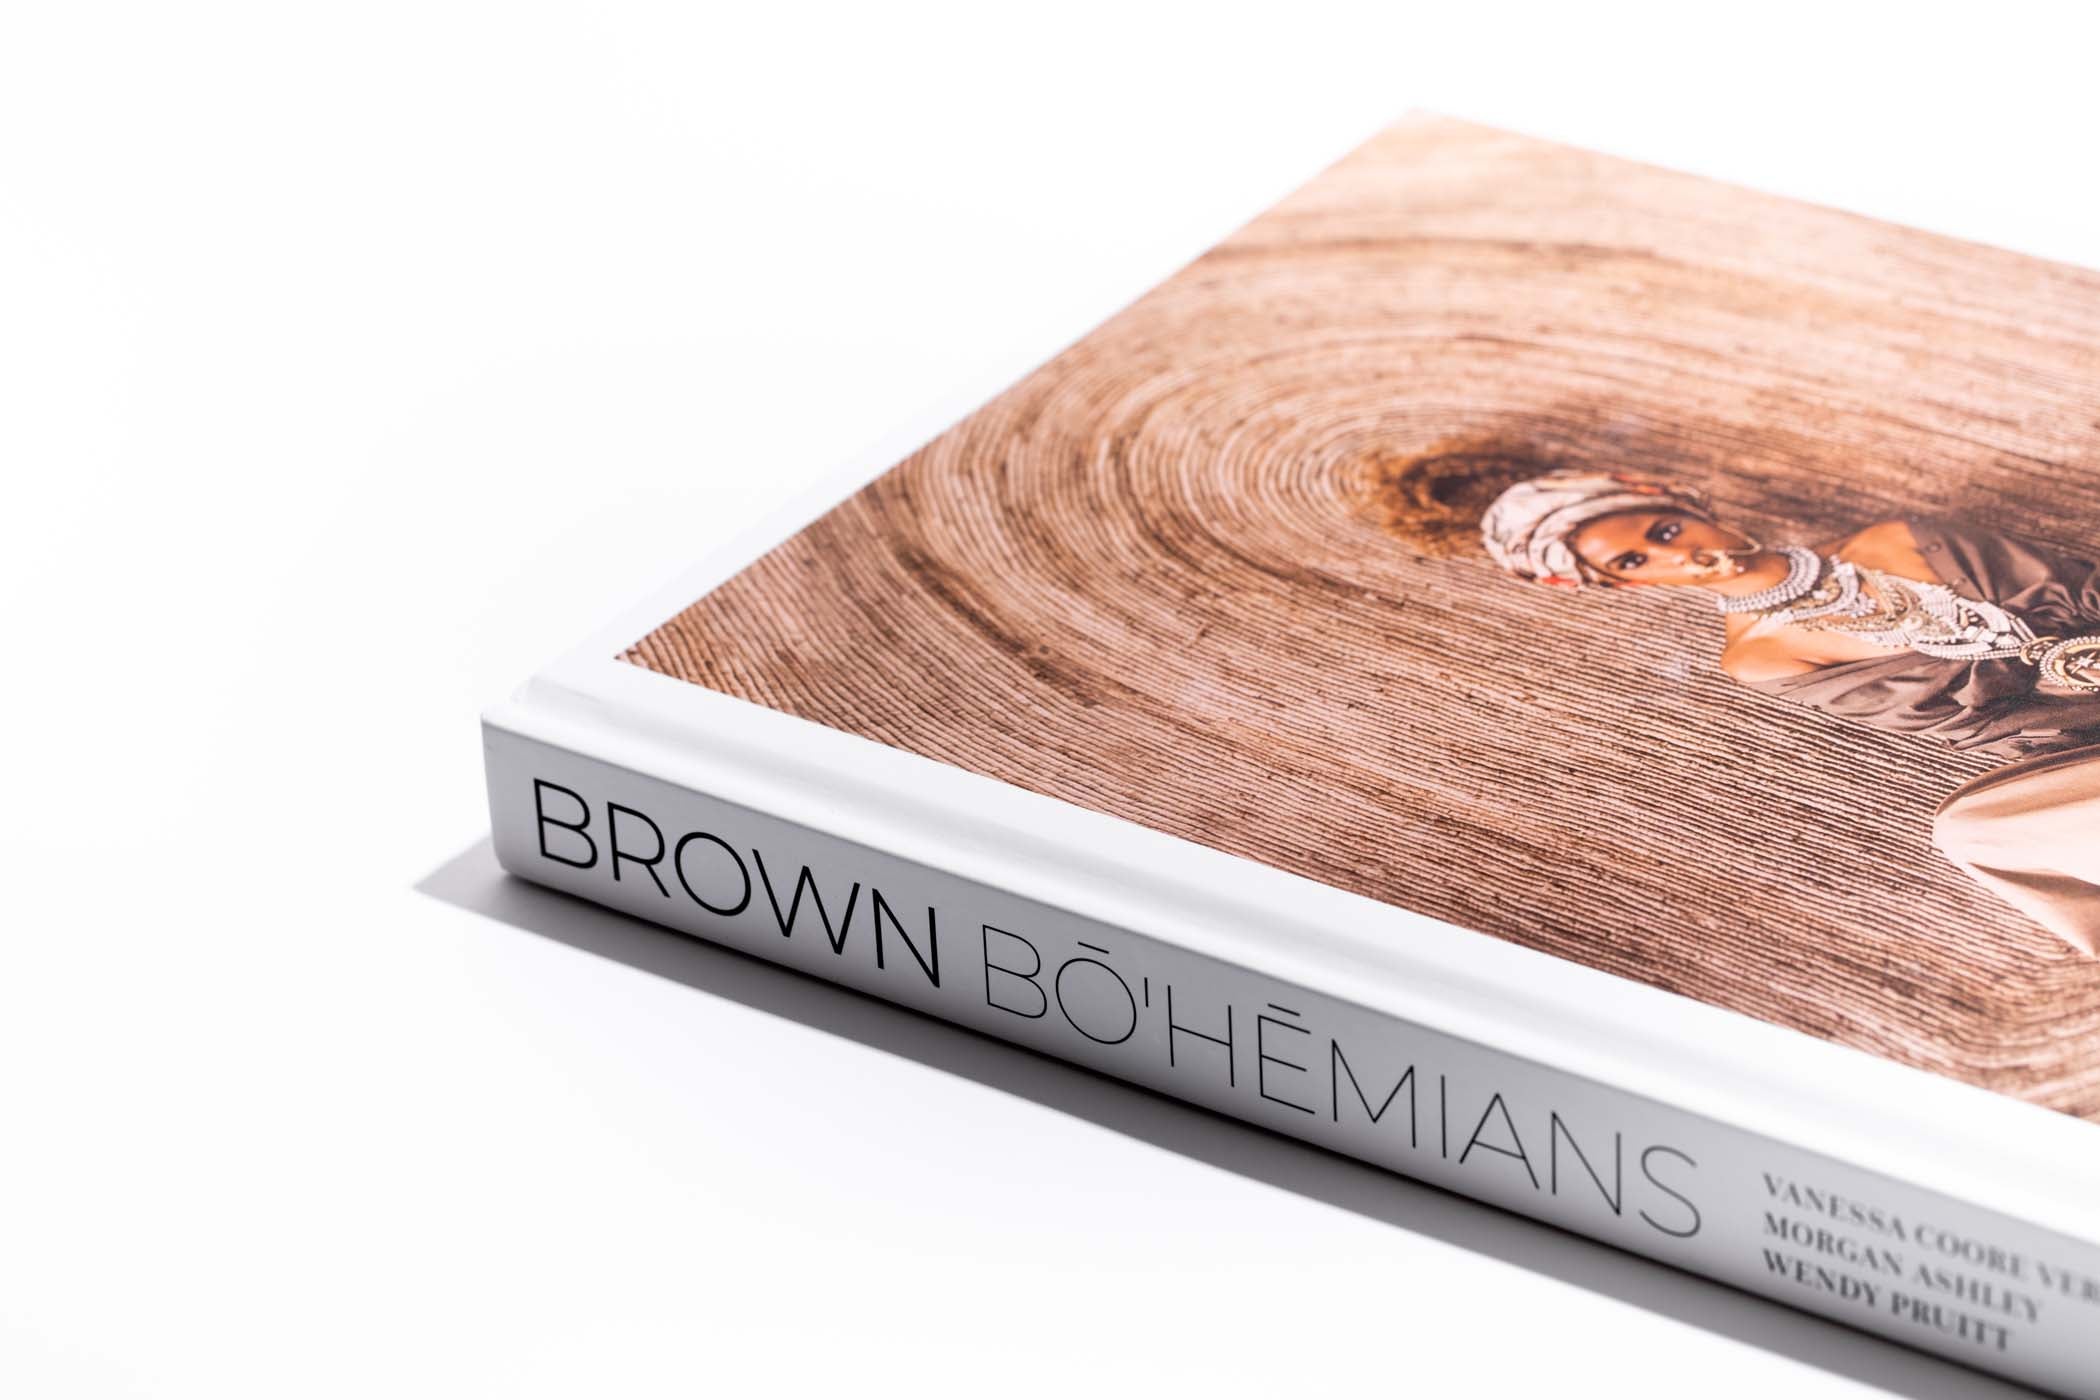 Brown Bohemians: Honoring the Light and Magic of Our Creative Community